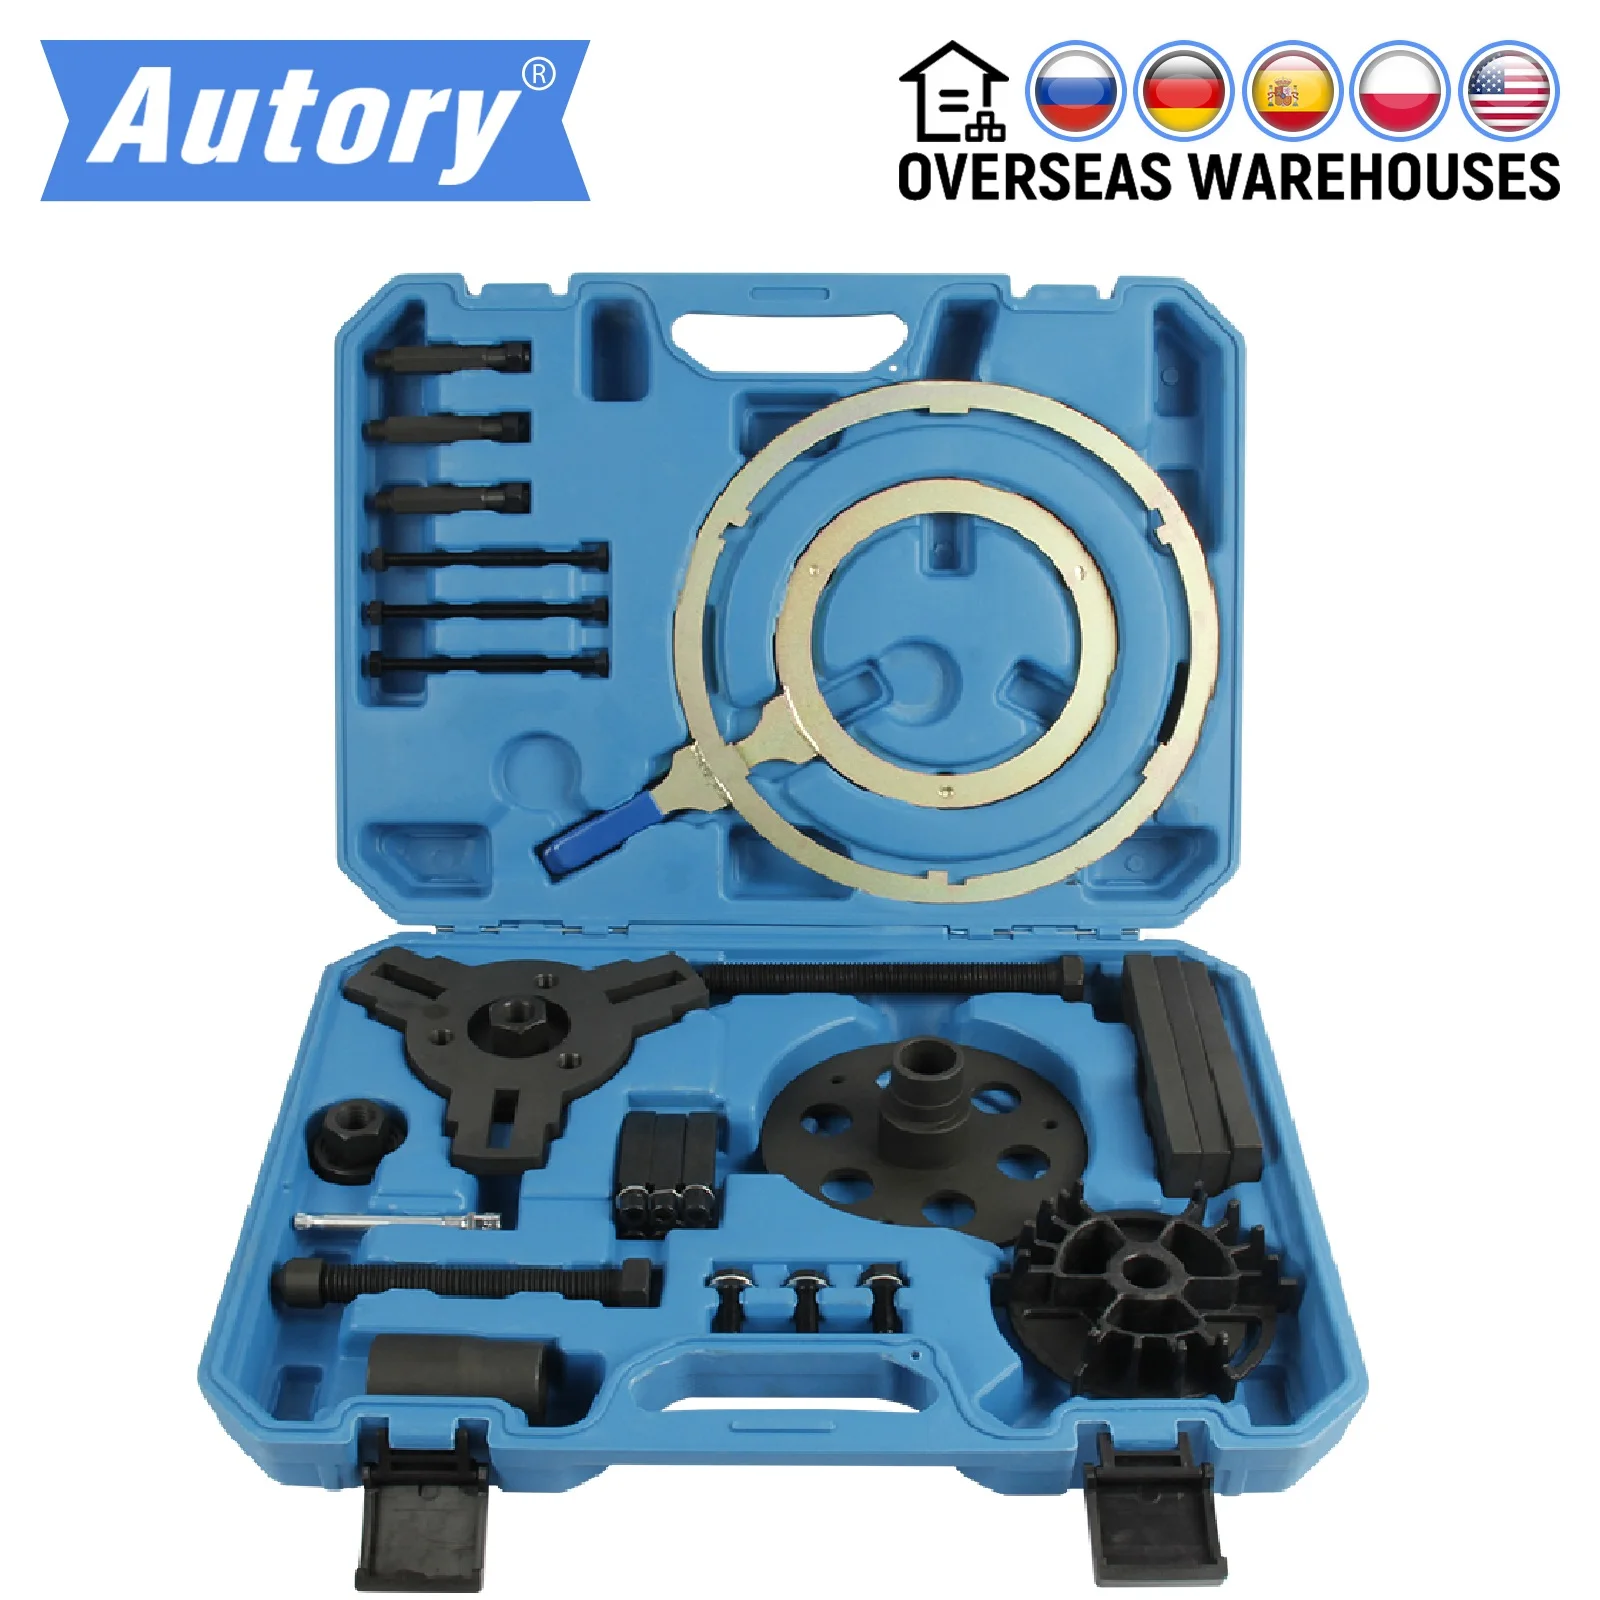 

AUTORY Automotive DSG DCT DPS6 Dual Double Clutch Transmission Remover Installer Tool Kit For Ford Car Repair Tool